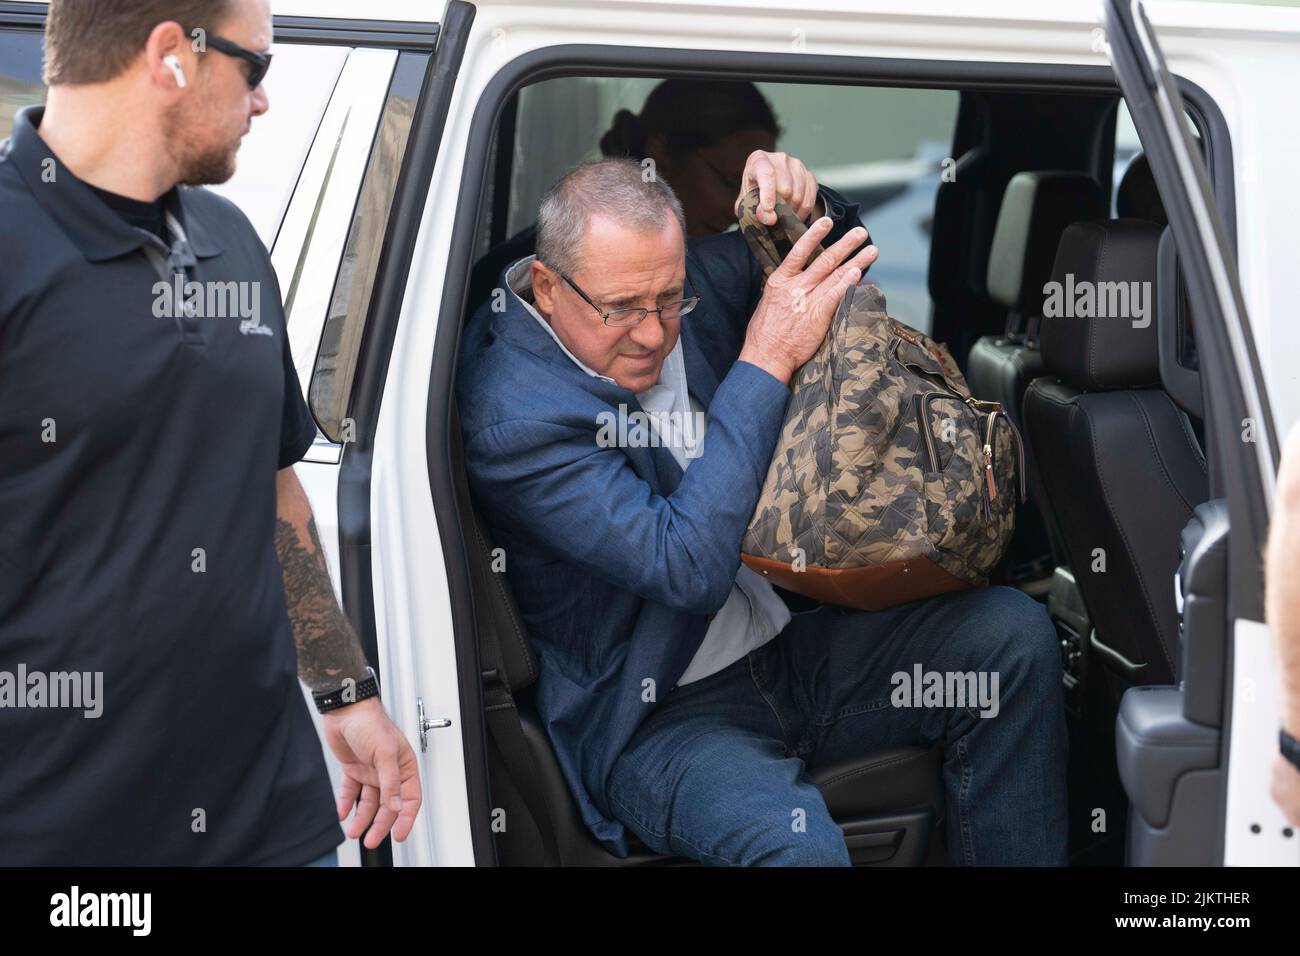 Flanked by heavy security, father NEIL HESLIN arrives at the Travis County Courthouse in Austin for day 7 of the Alex Jones defamation trial with Sandy Hook survivors on August 3, 2022. Hslin's son, Jesse was killed in the 2012 Sandy Hook school massacre. Credit: Bob Daemmrich/Alamy Live News Stock Photo